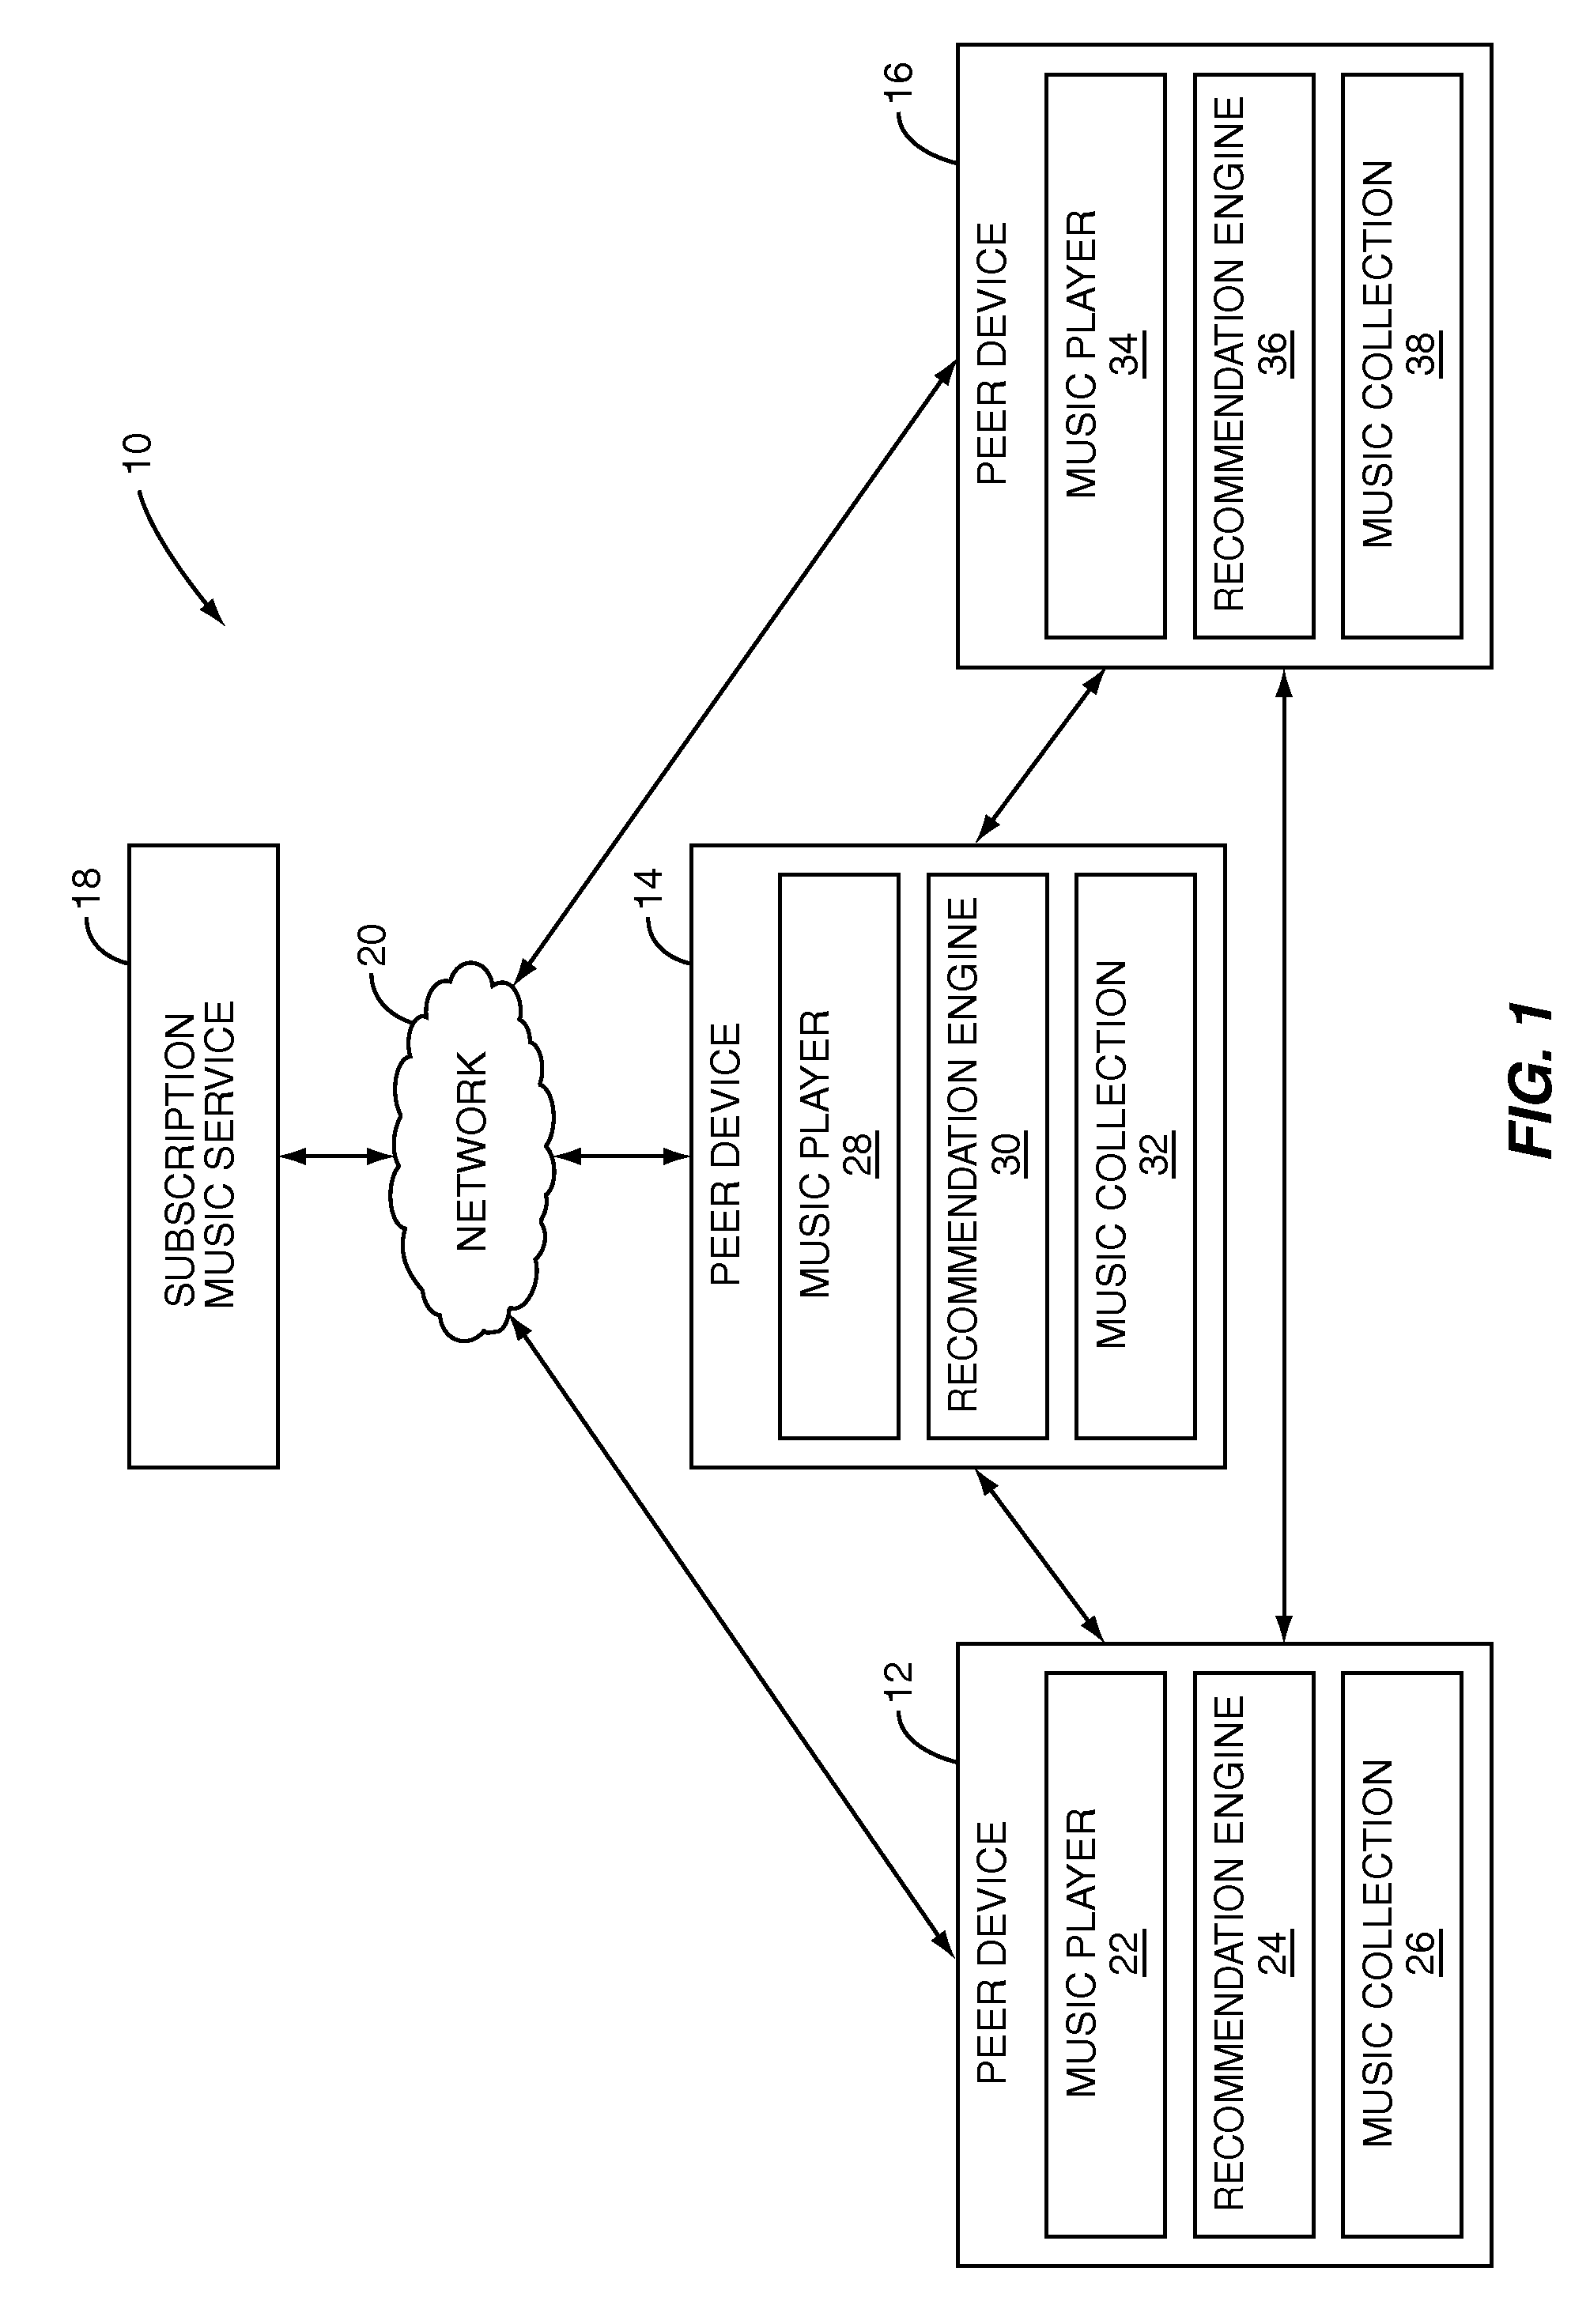 Graphical user interface system for allowing management of a media item playlist based on a preference scoring system